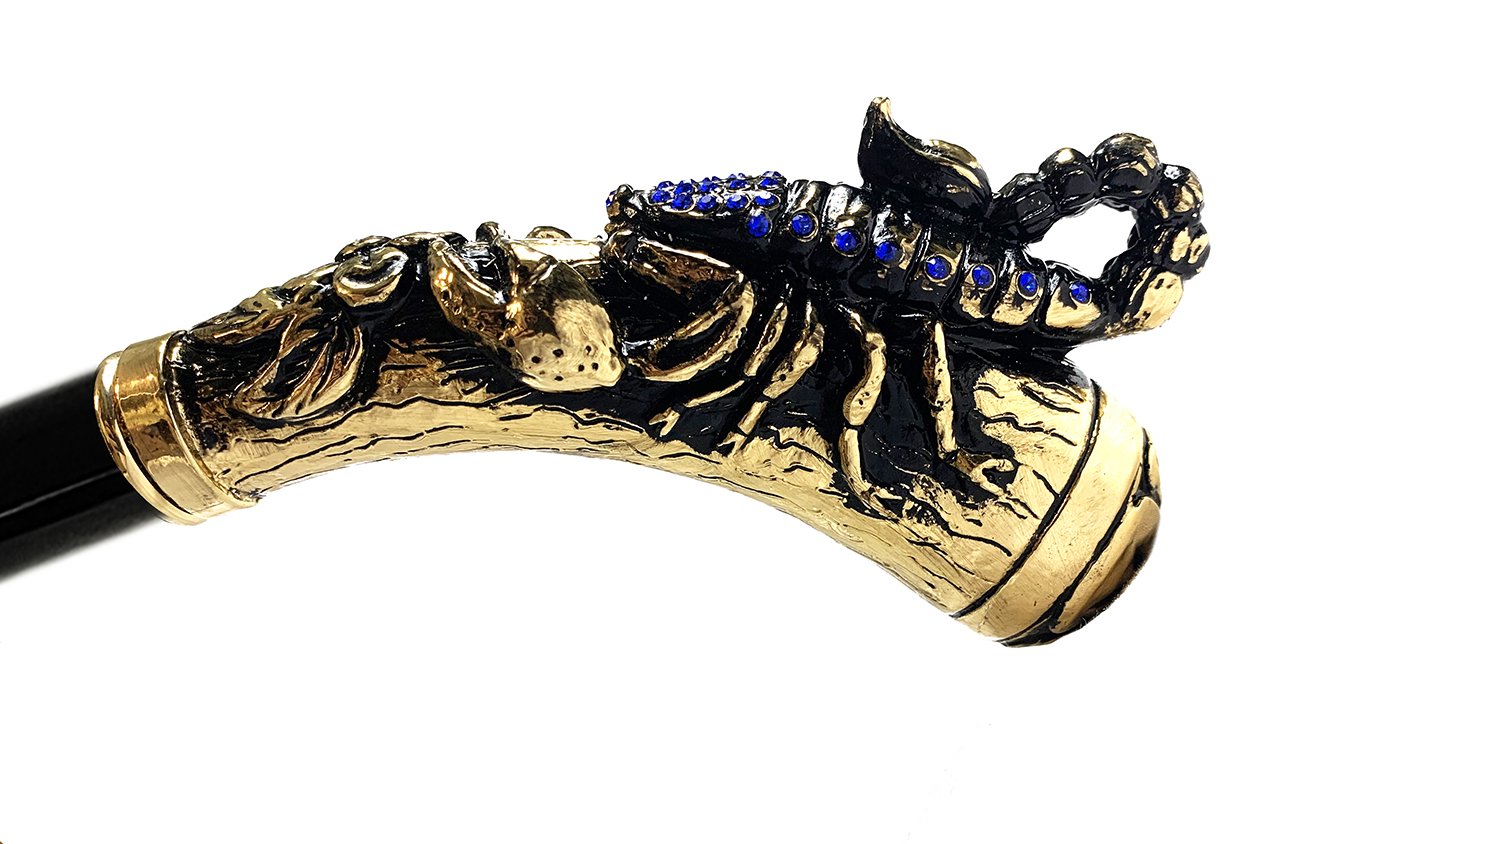 Original Scorpion Handle with Sapphire crystals - IL MARCHESATO LUXURY UMBRELLAS, CANES AND SHOEHORNS